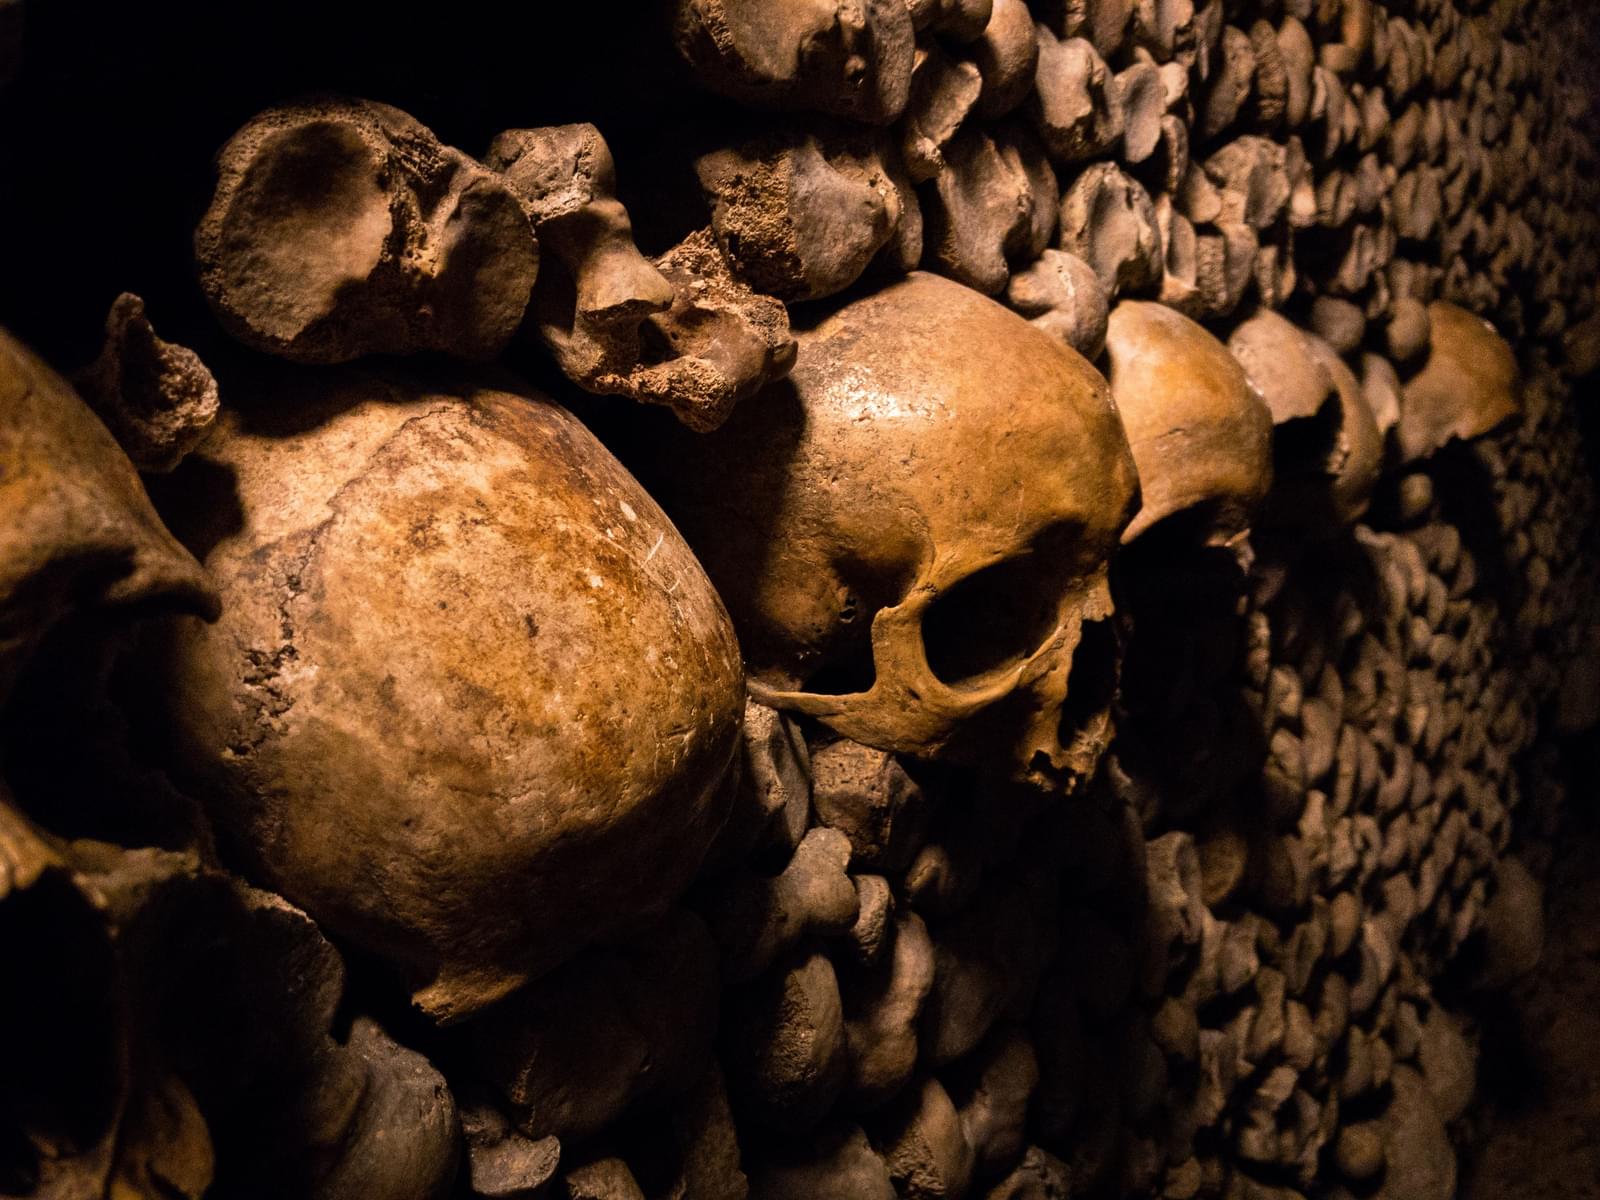 History of Catacombs of Paris